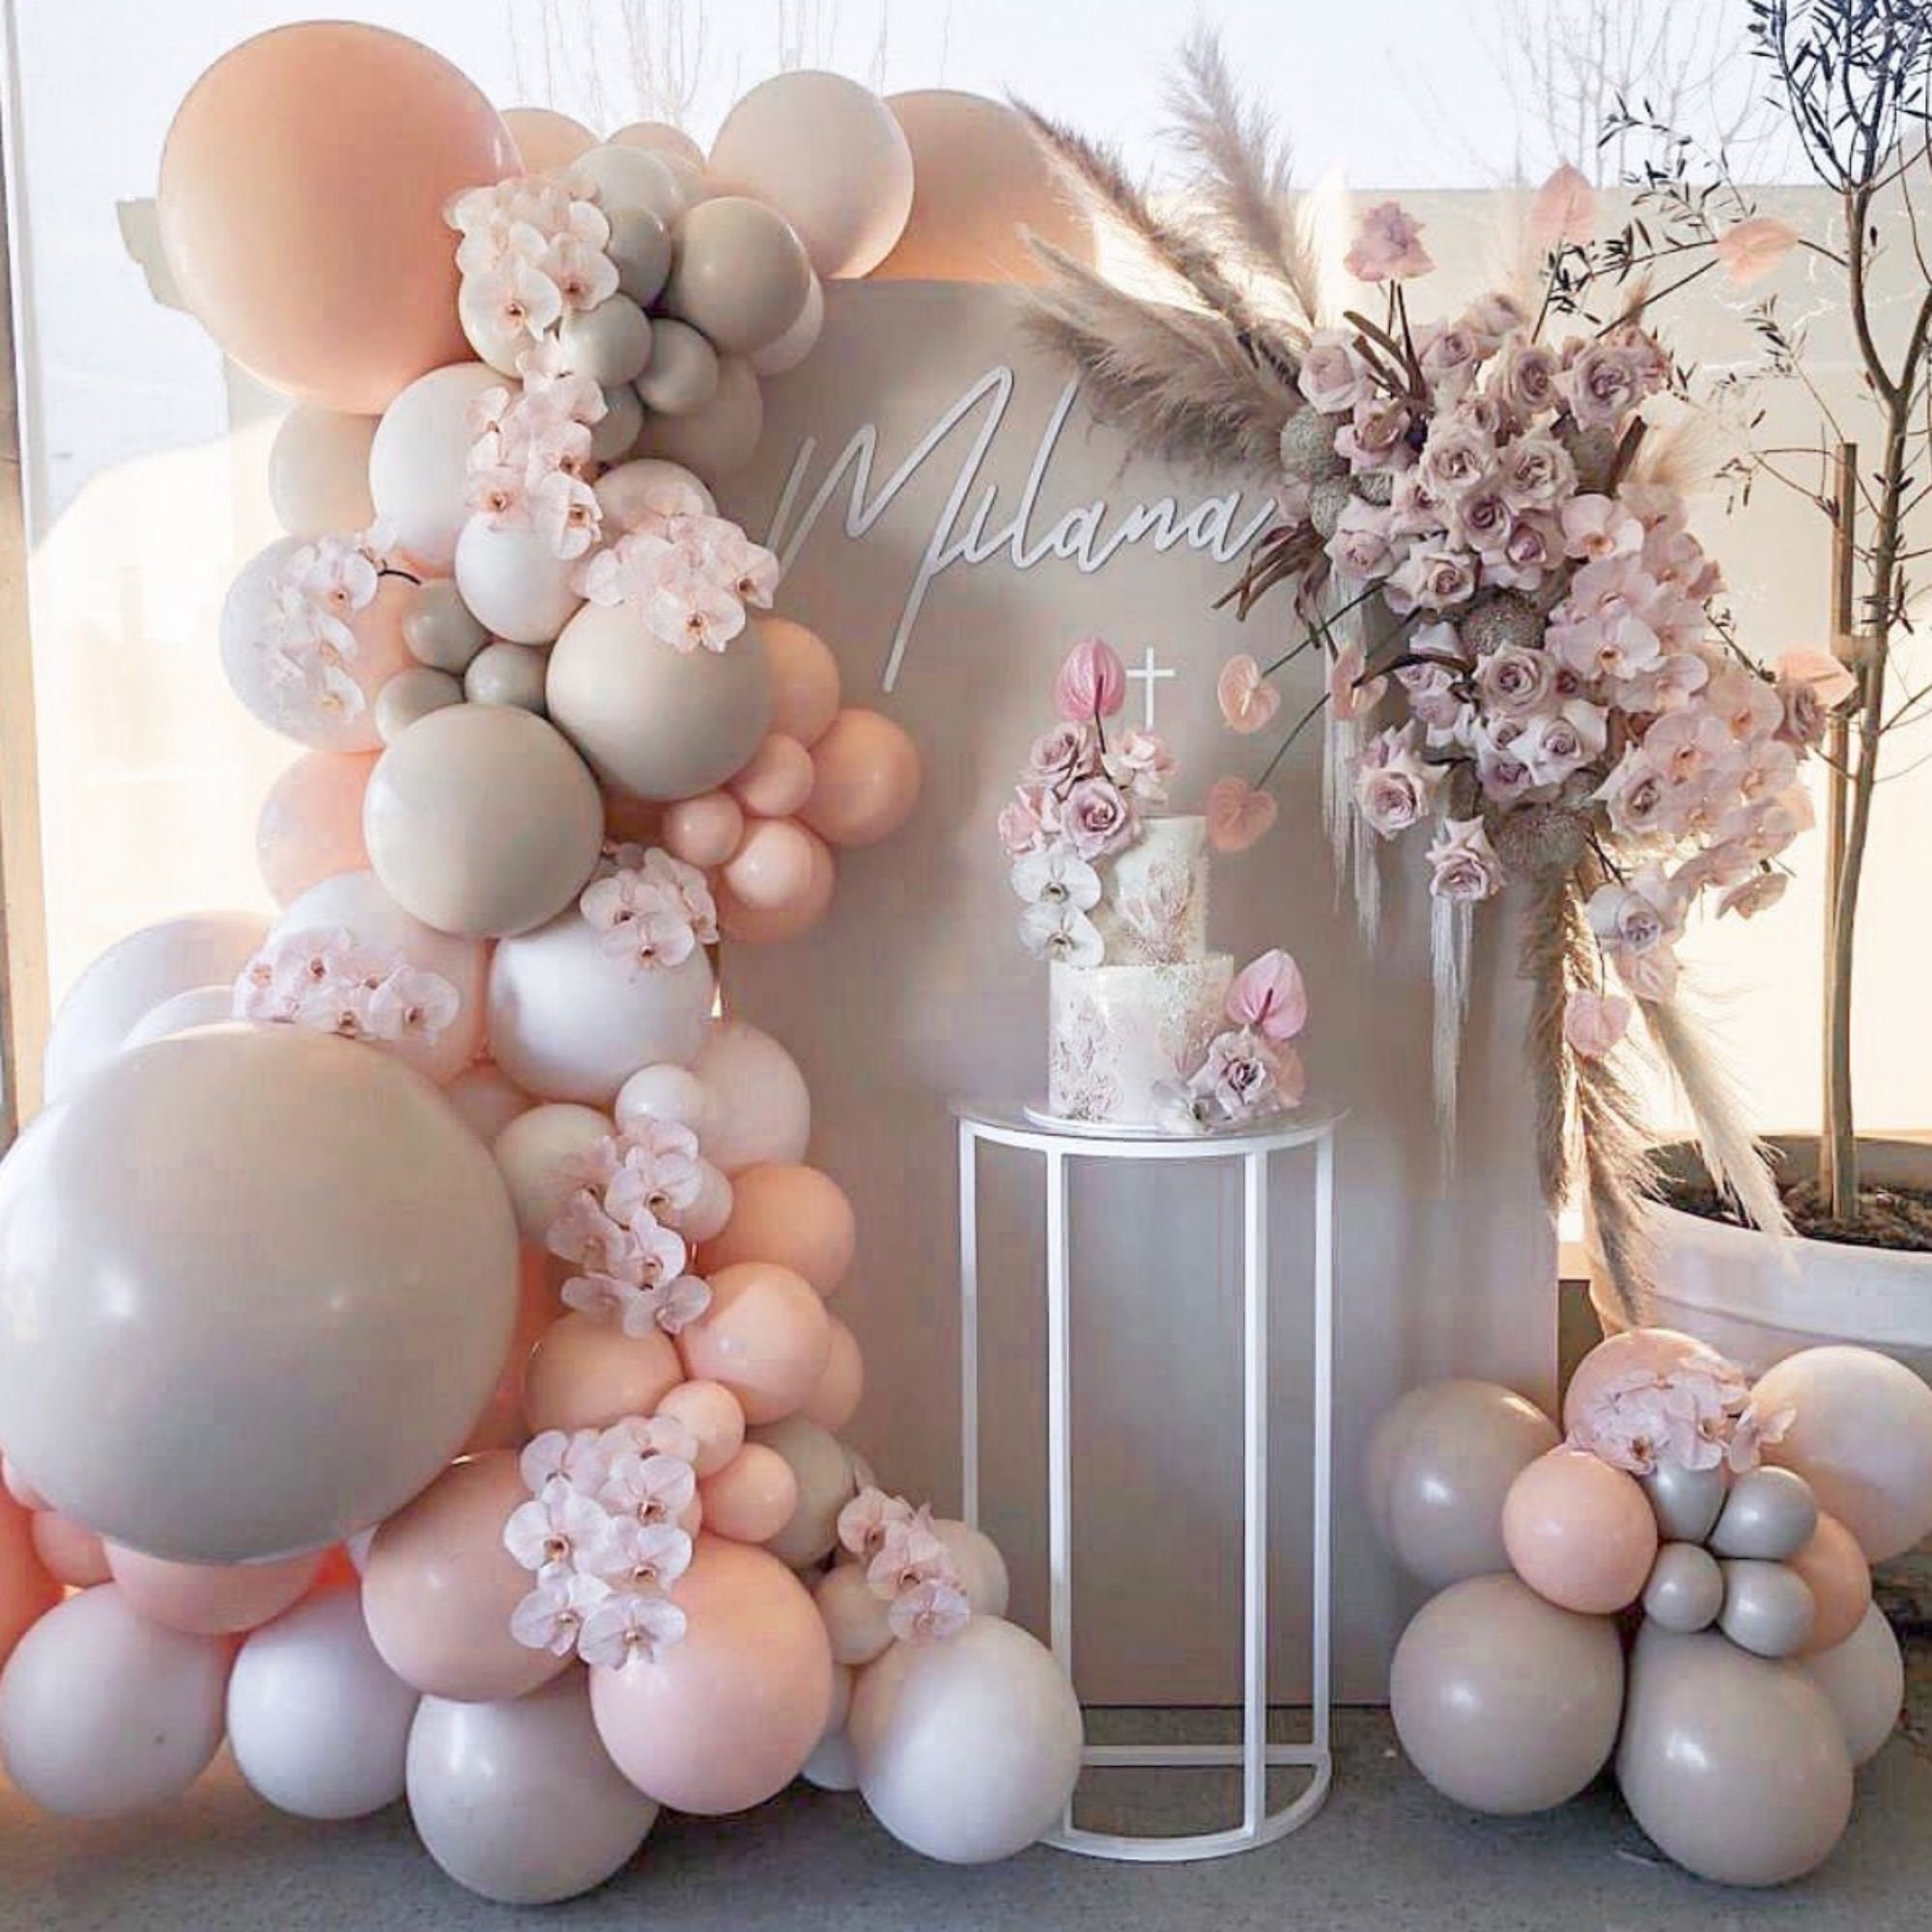 7 pc Butterfly Wedding Shower Balloon Bouquet Party Decoration Bridal Engagement